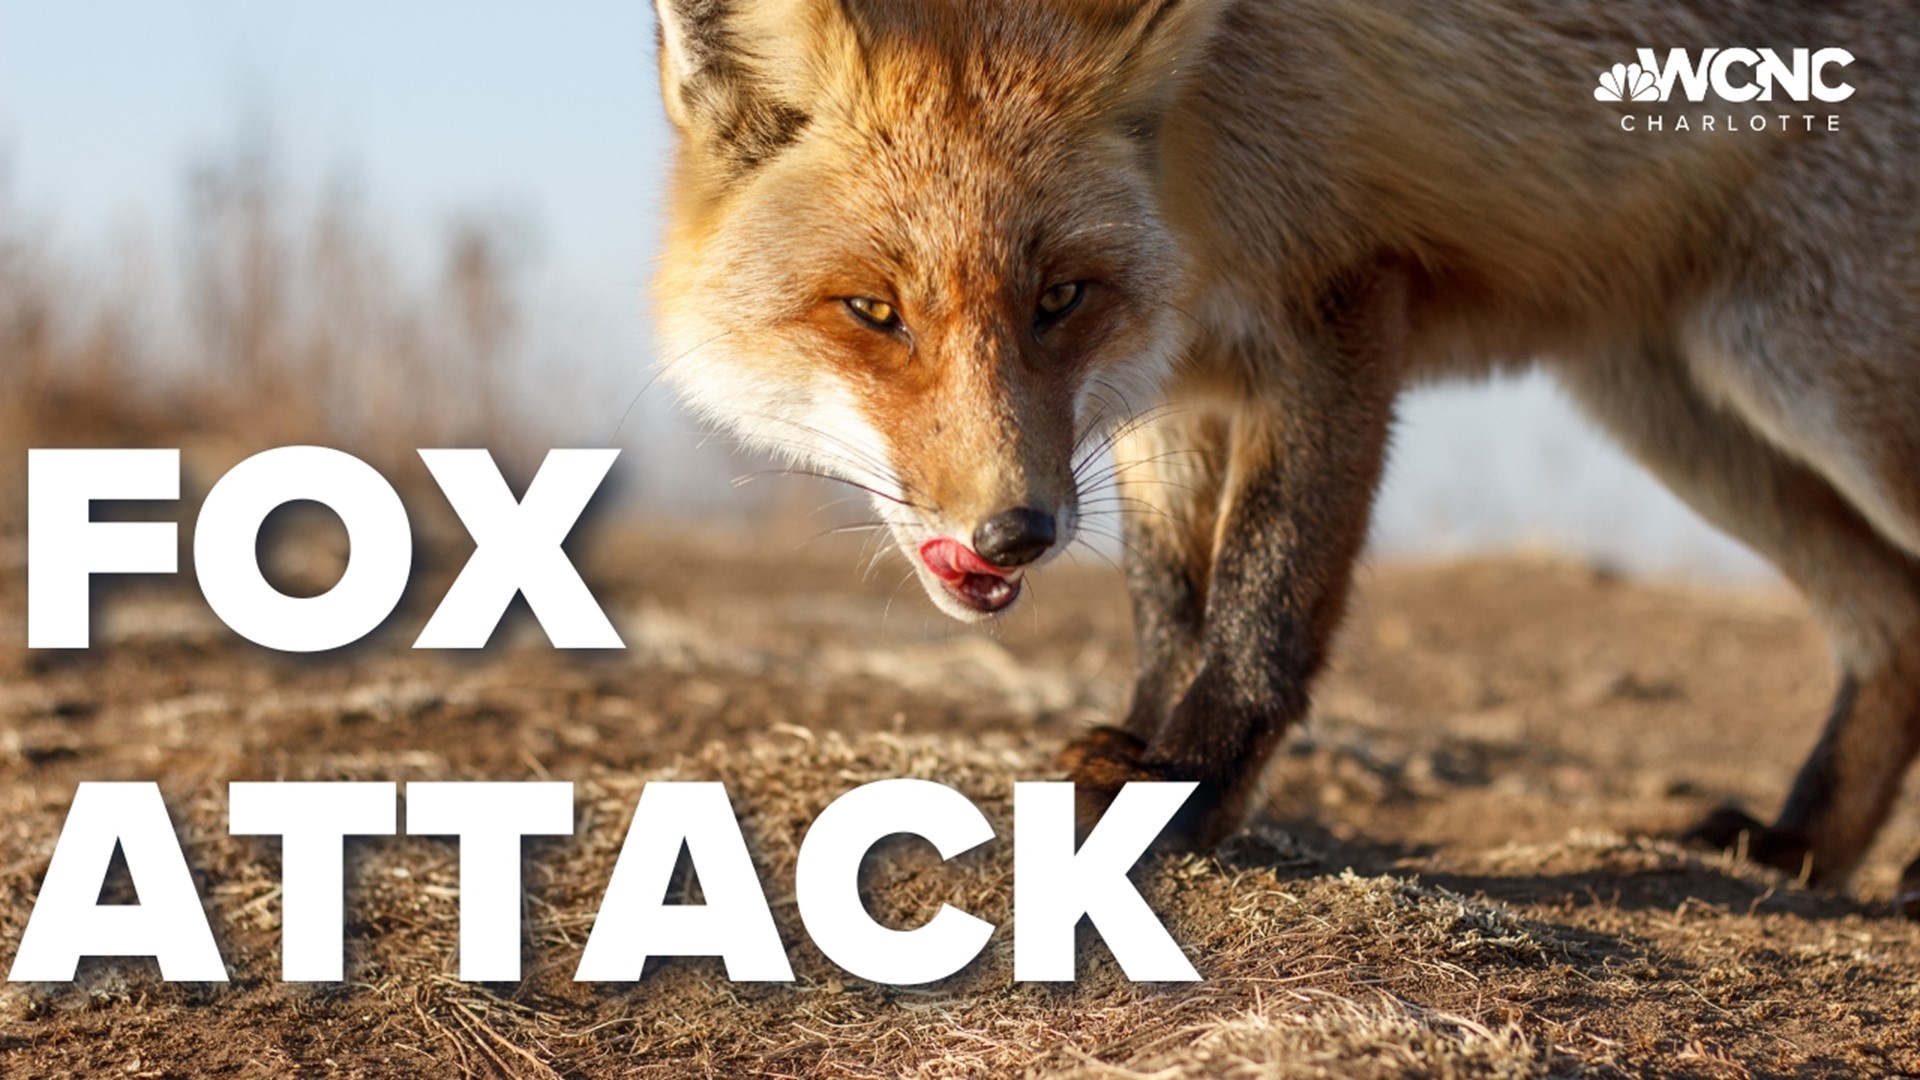 A Union County couple is recovering after being attacked by a rabid fox.